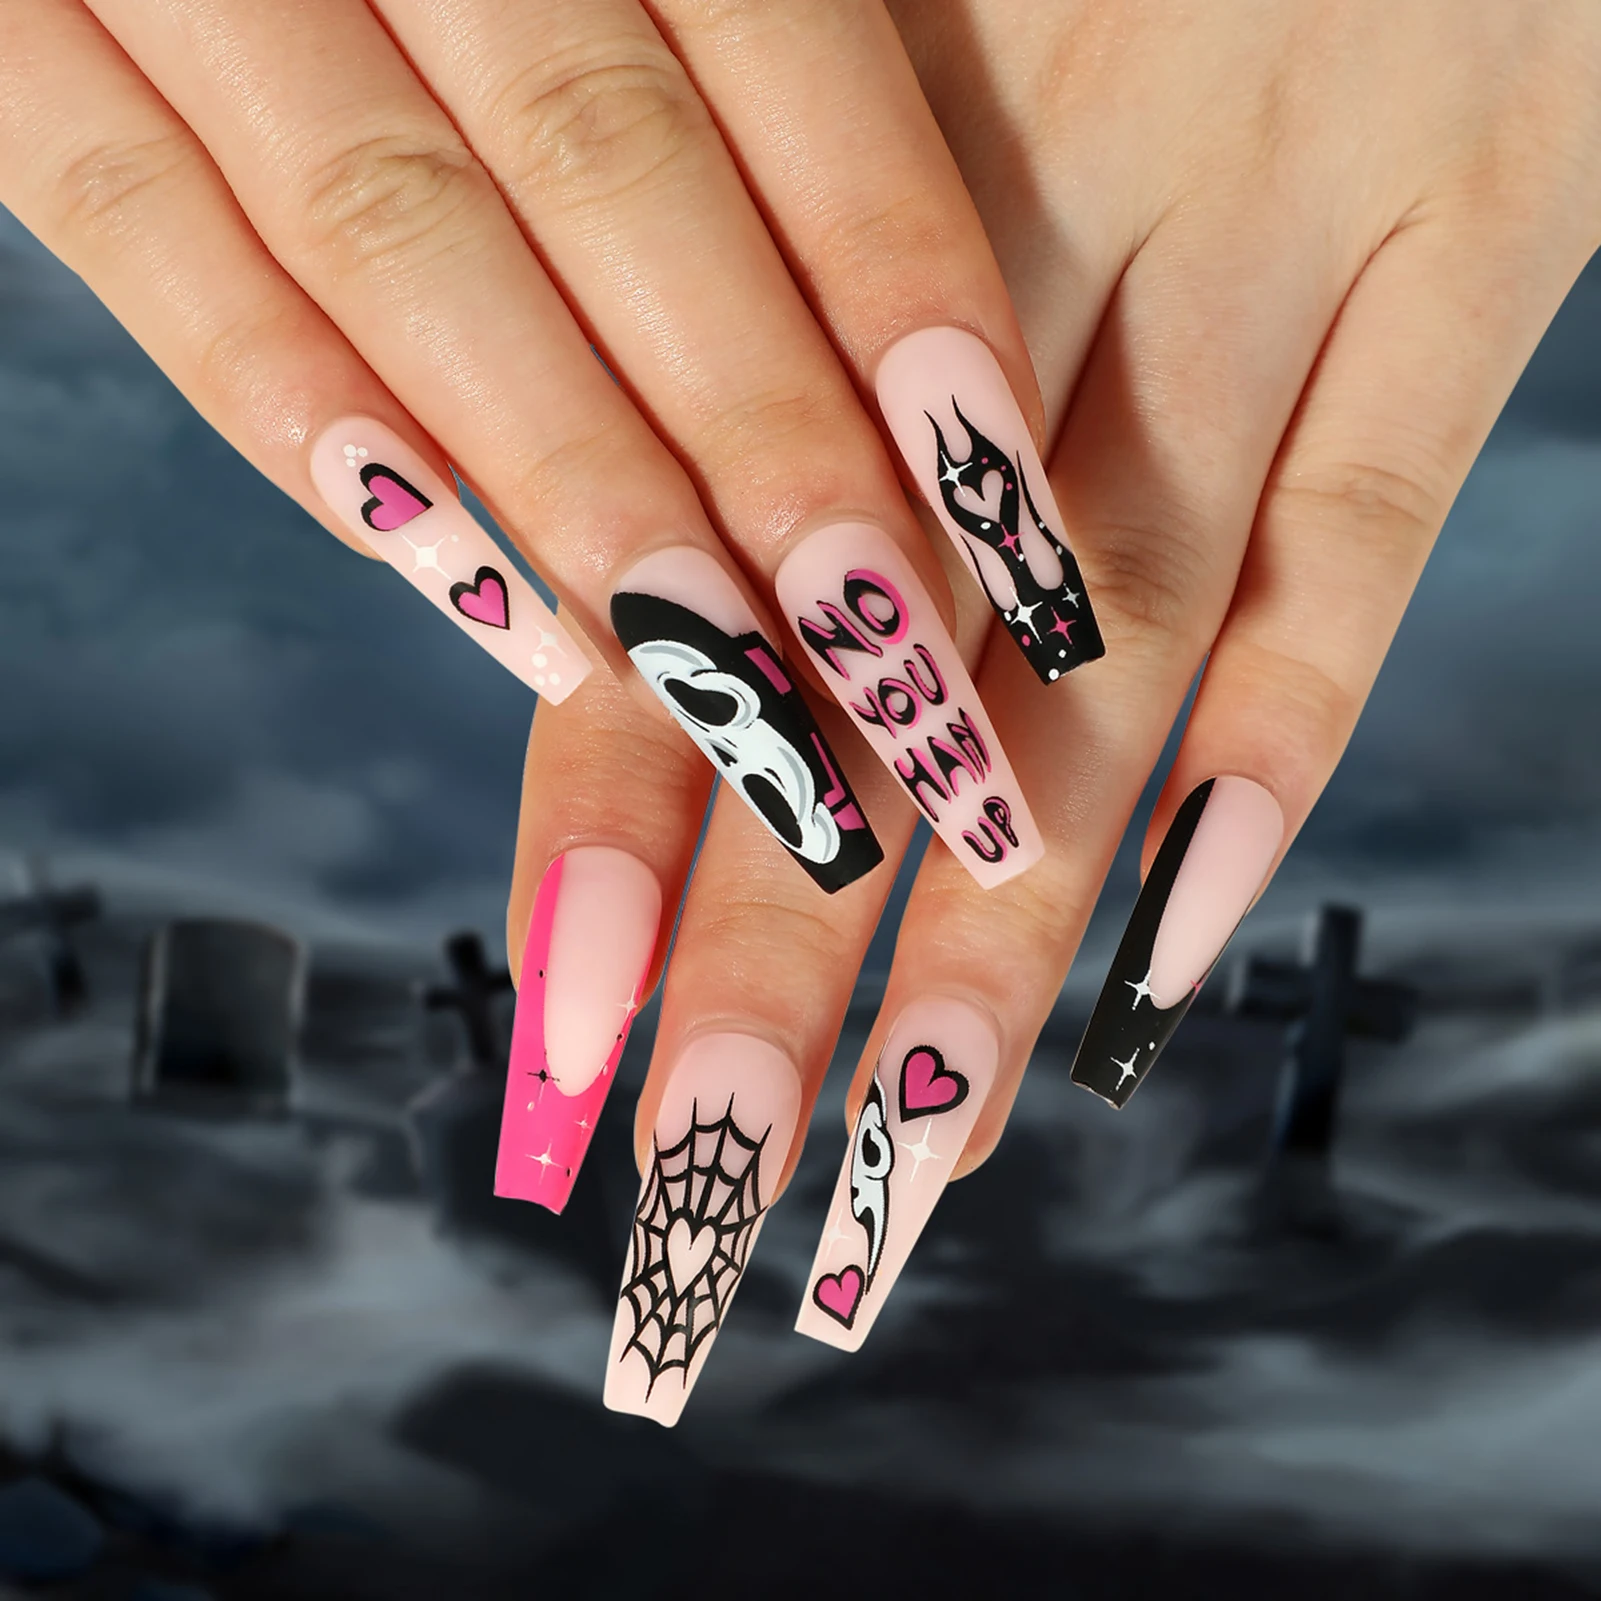  24 Pcs Pink Halloween Press on Nails Medium Length Fake Nails  White French Tip False Nails with Spider Web Design Coffin Nail Tips Cute  Glue on Nails Halloween Nails Fall Press